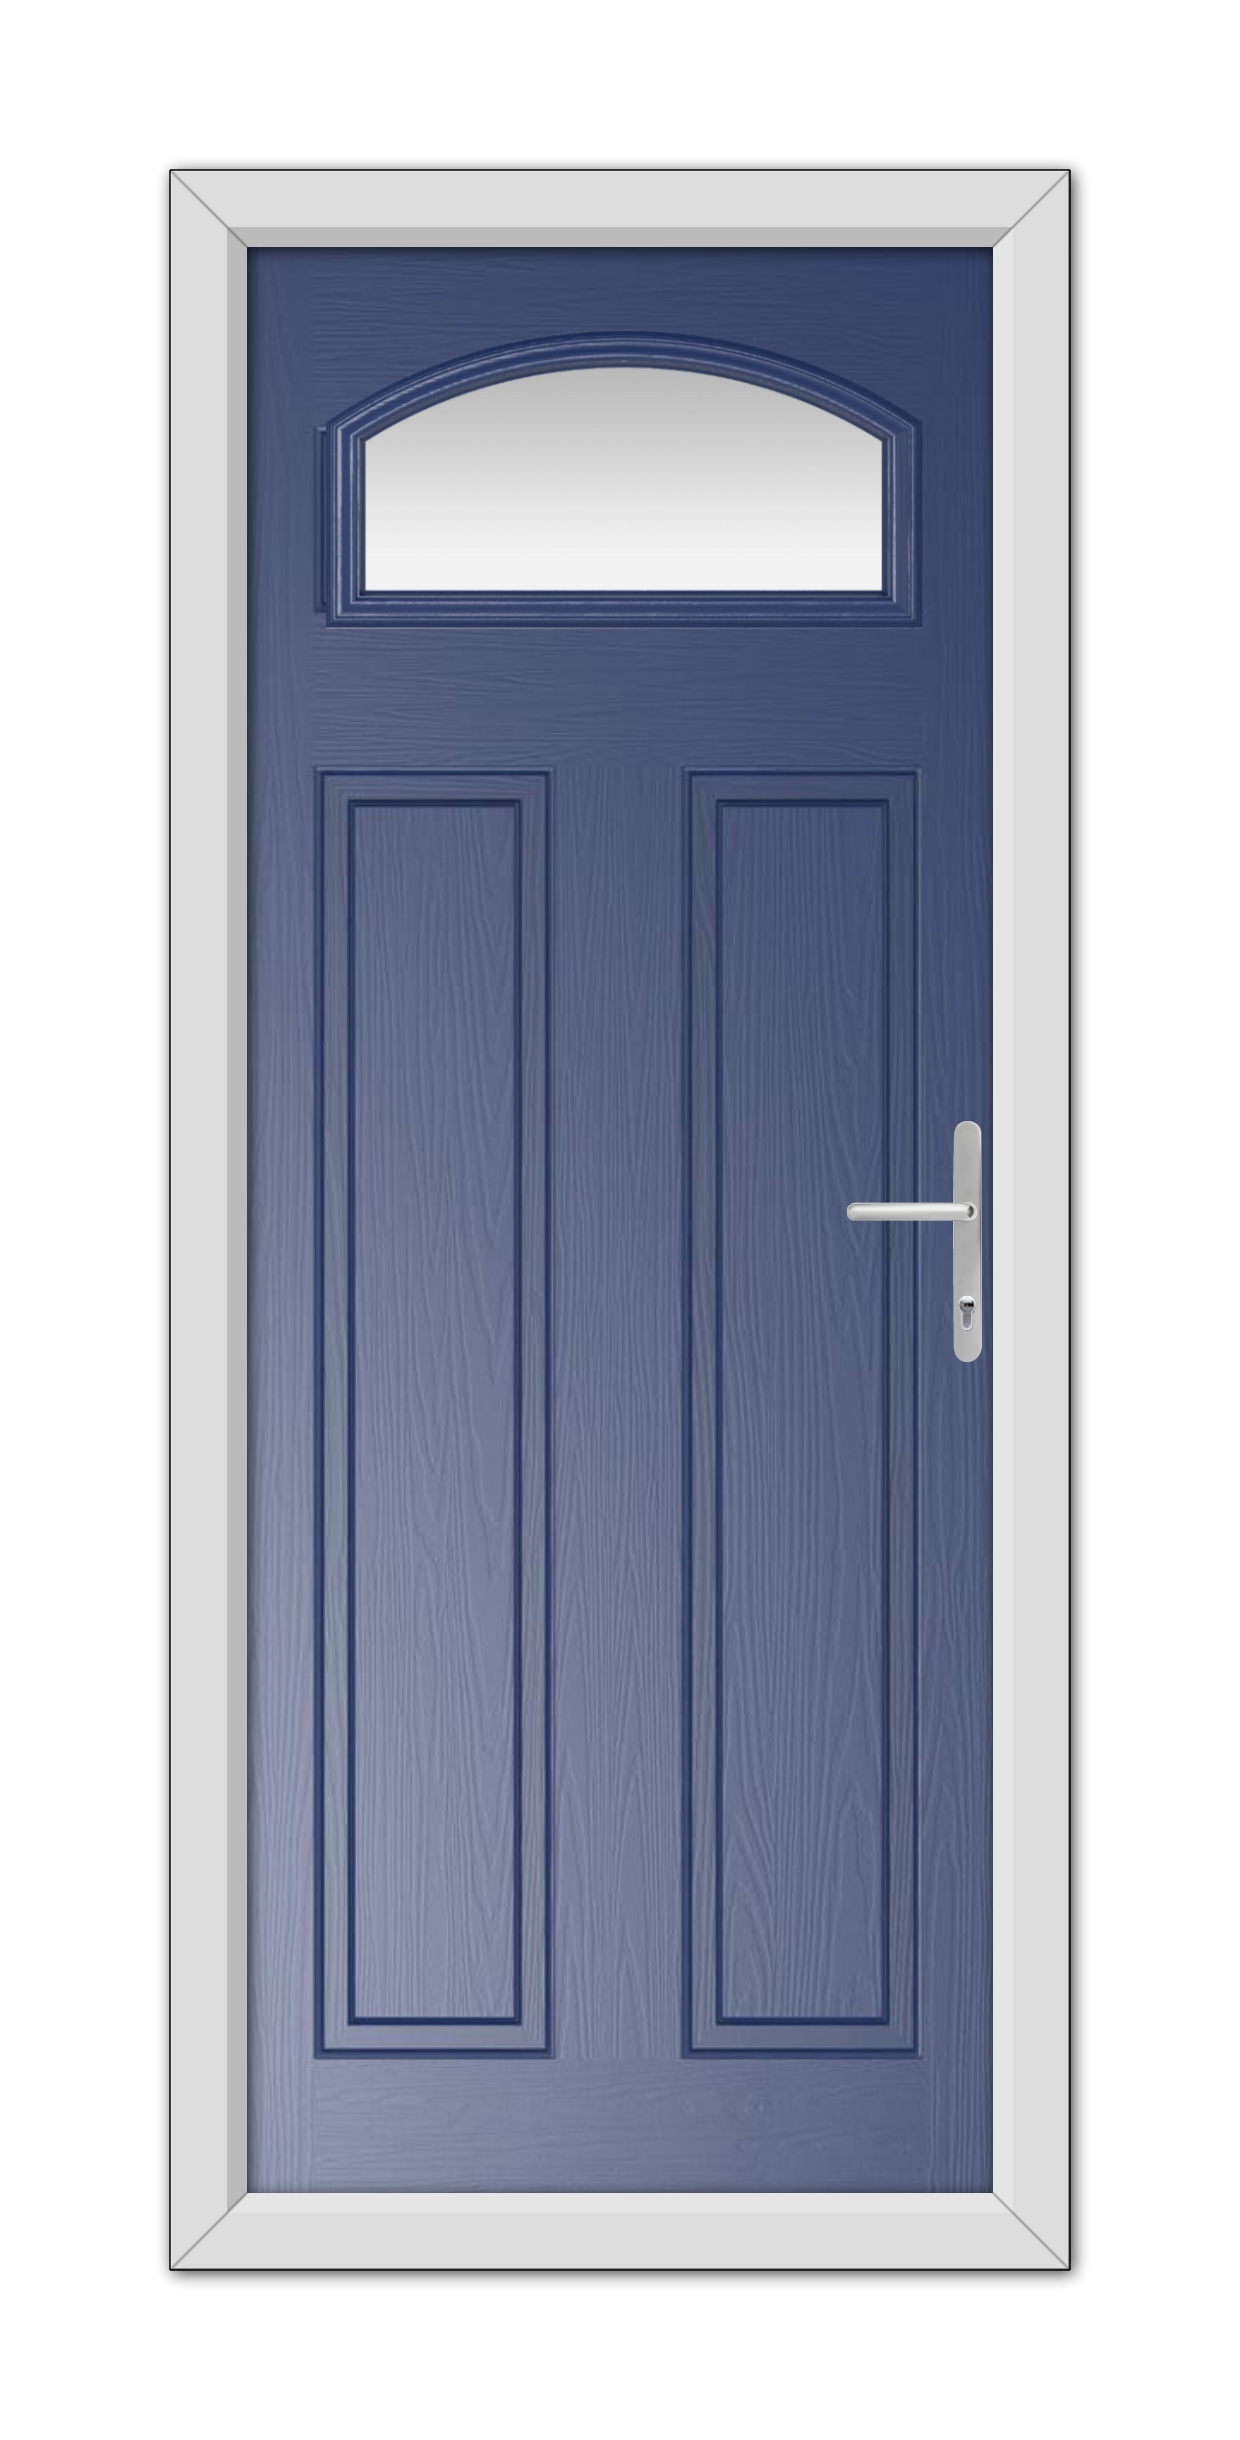 A Blue Harlington Composite Door 48mm Timber Core with an arched window and a white frame, featuring a silver handle on the right.